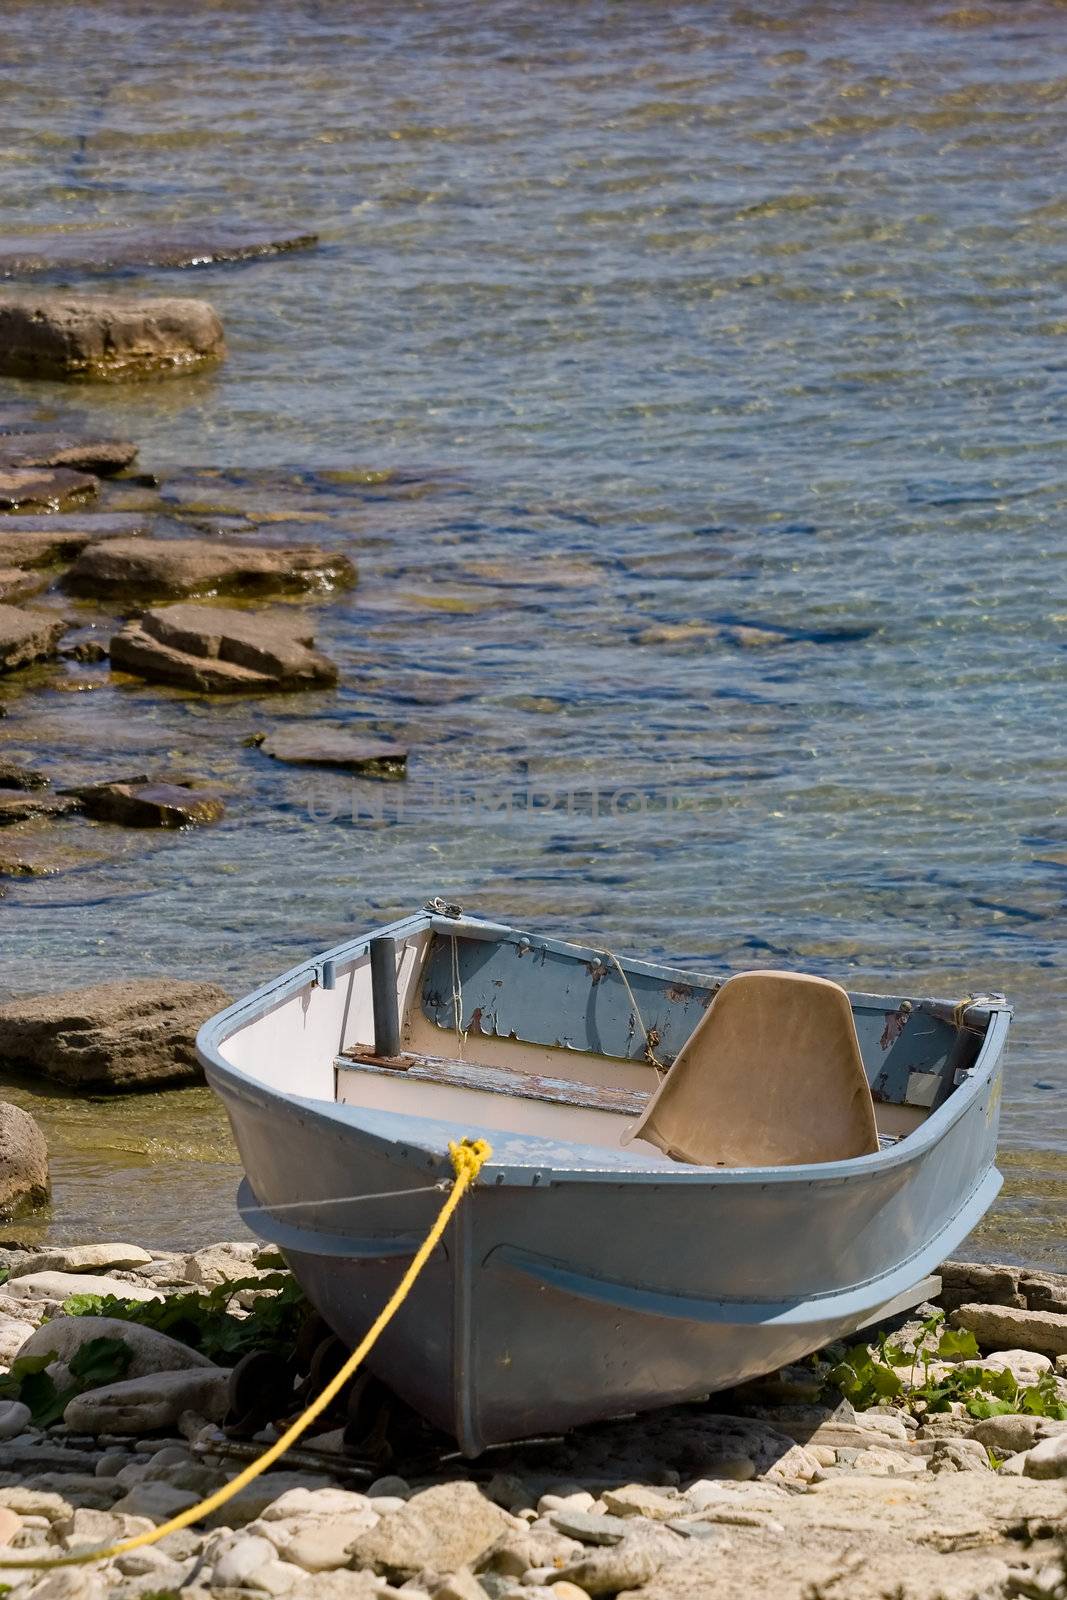 An old boat, tied up on the rocks, at the waters edge.